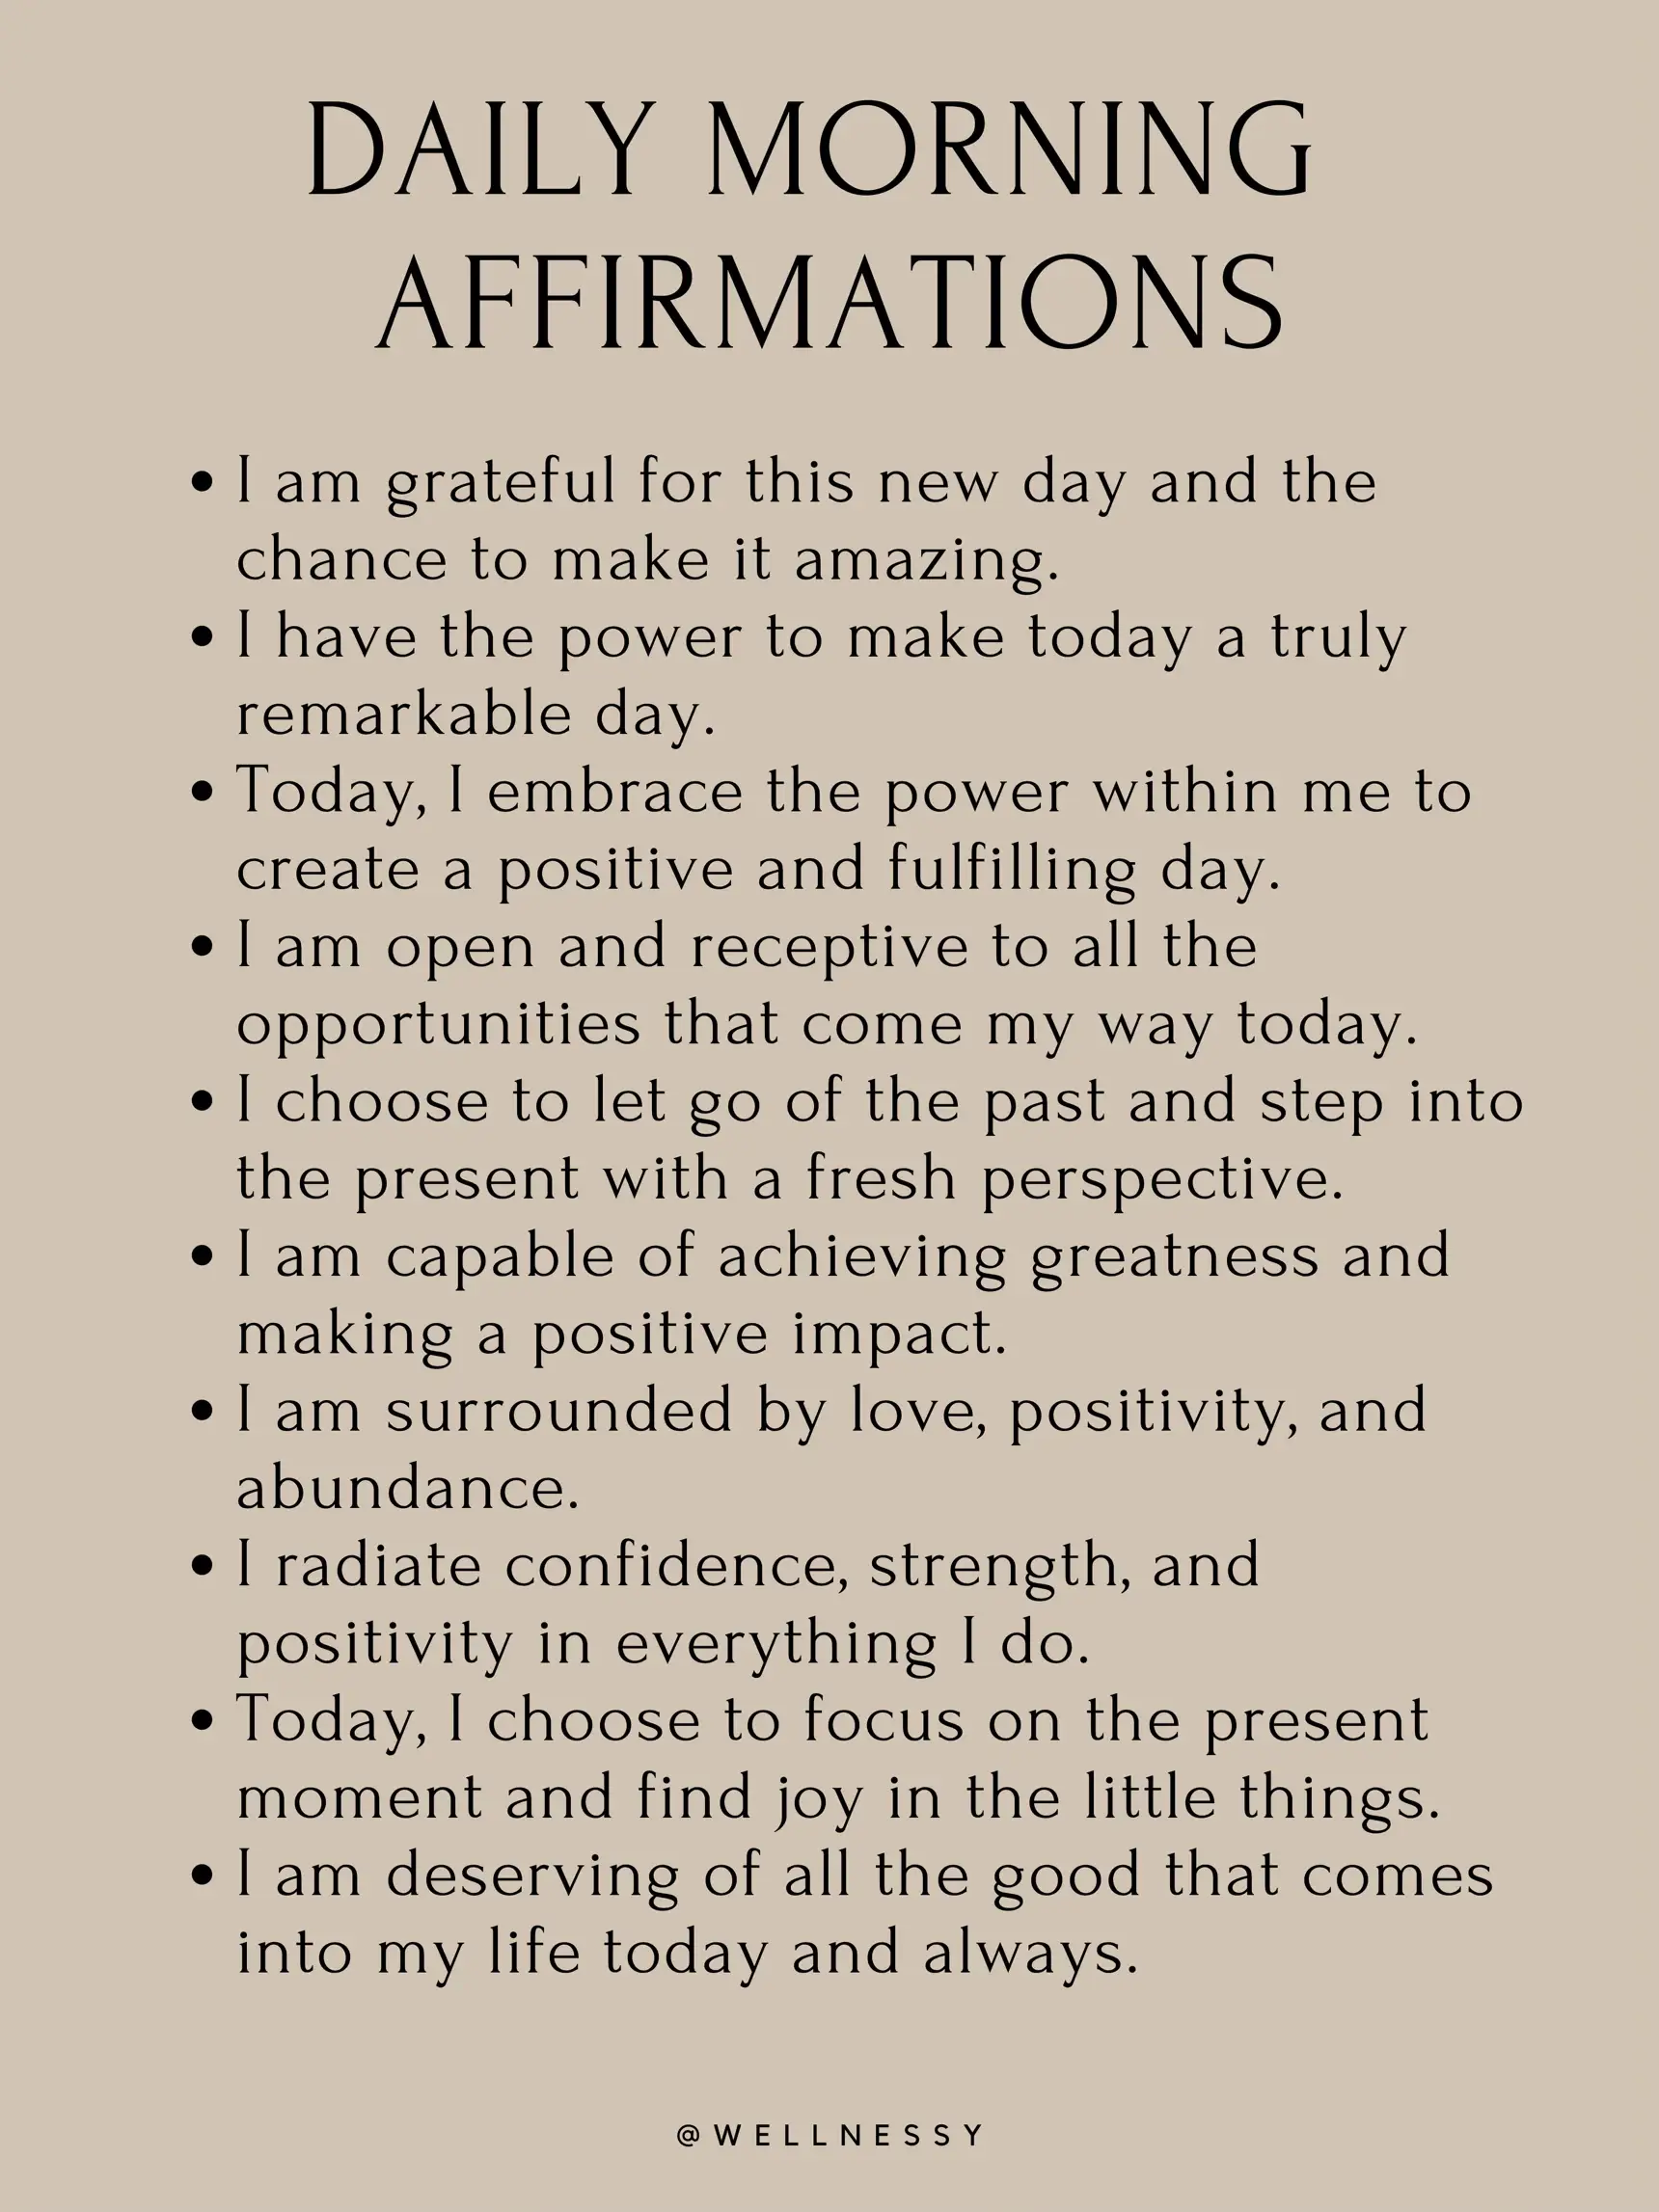 DAILY MORNING AFFIRMATIONS 🌟💫 | Gallery posted by Wellnessy | Lemon8